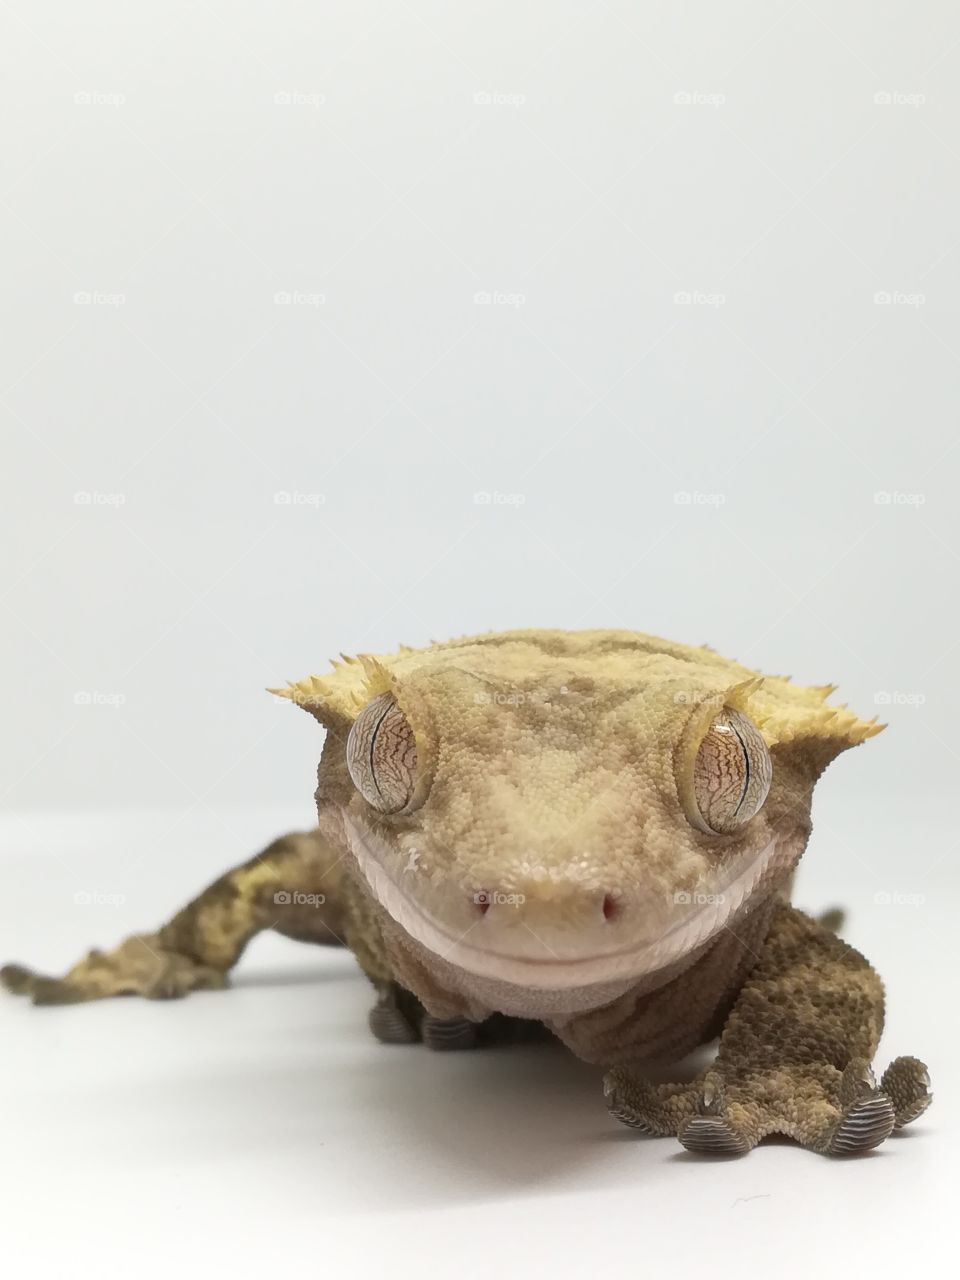 Angry Crested Gecko glare